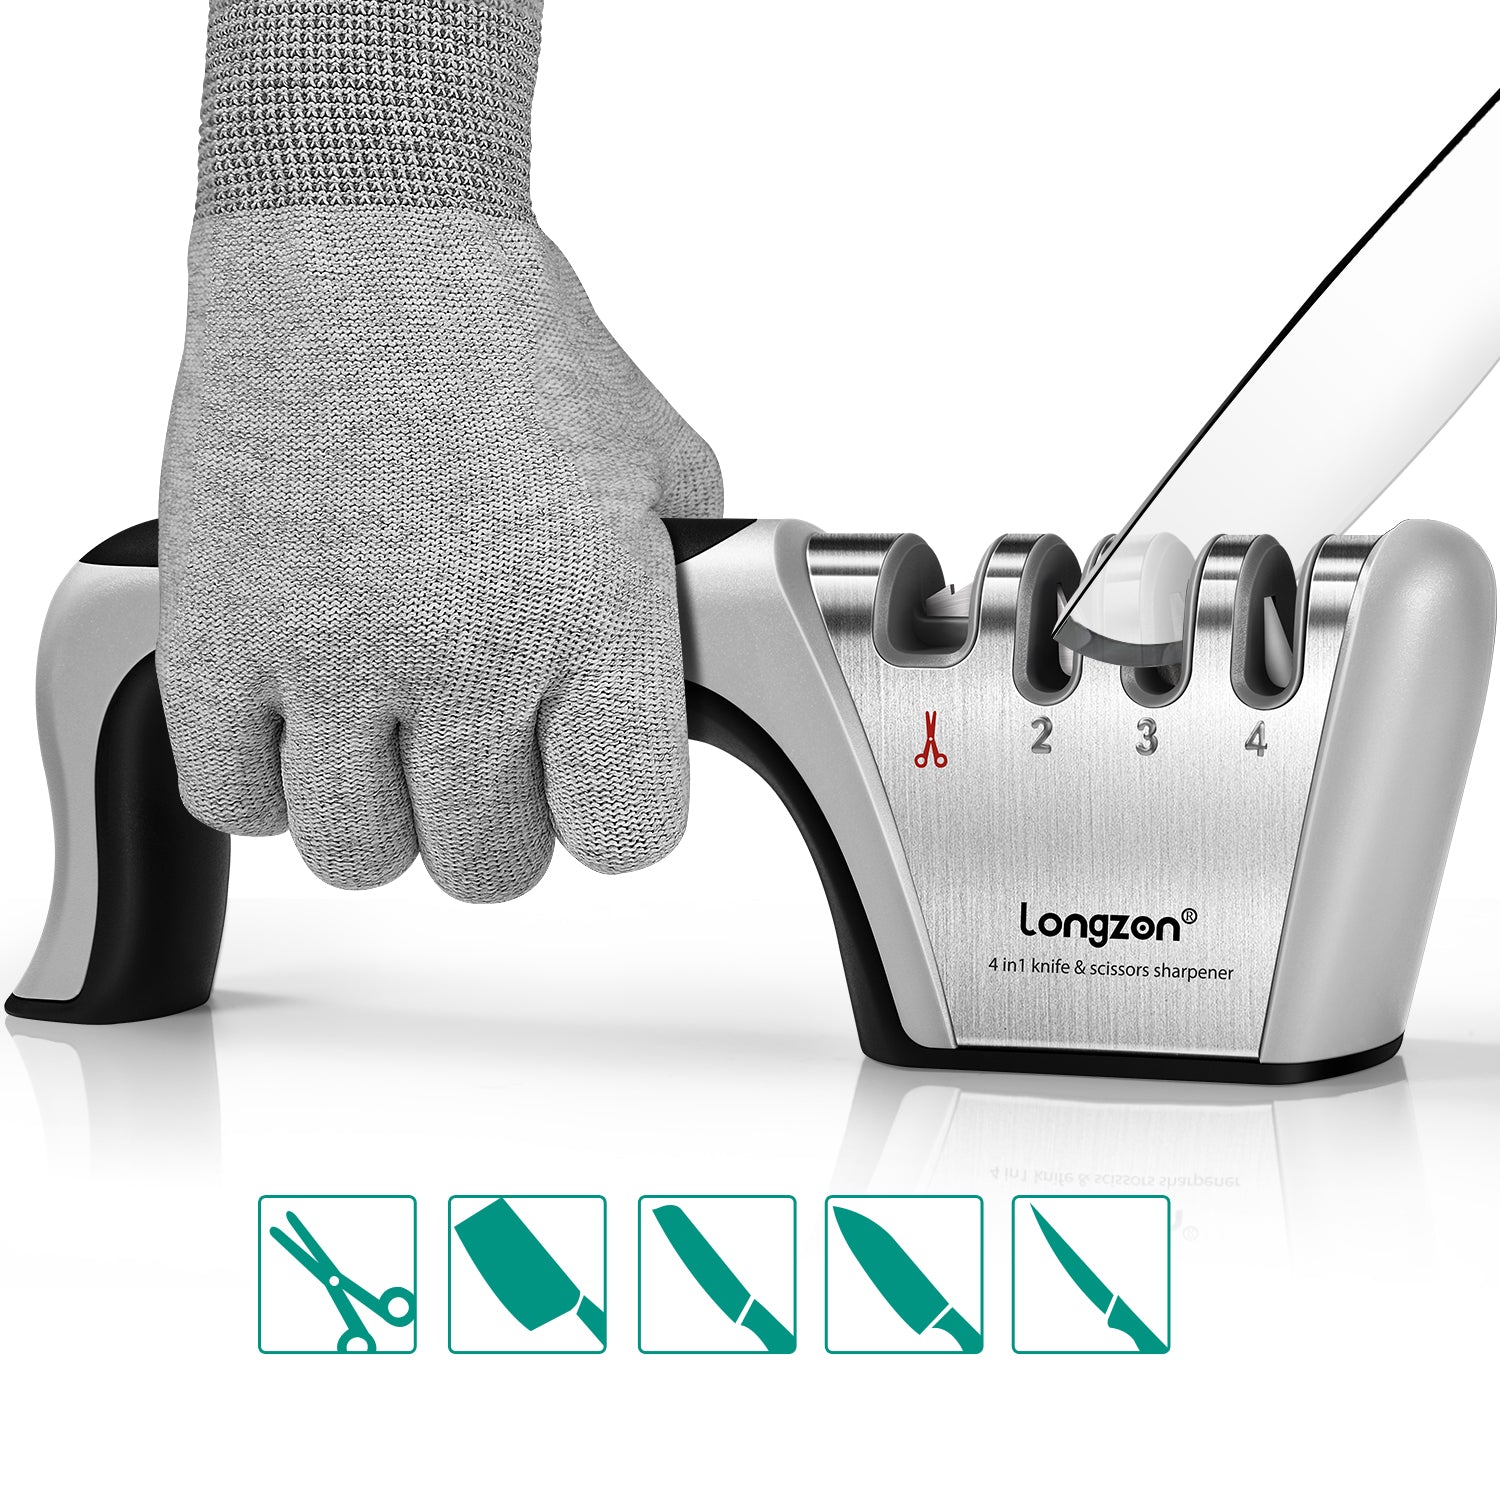 4-In-1 Longzon [4 Stage] Knife Sharpener with a Pair of Cut